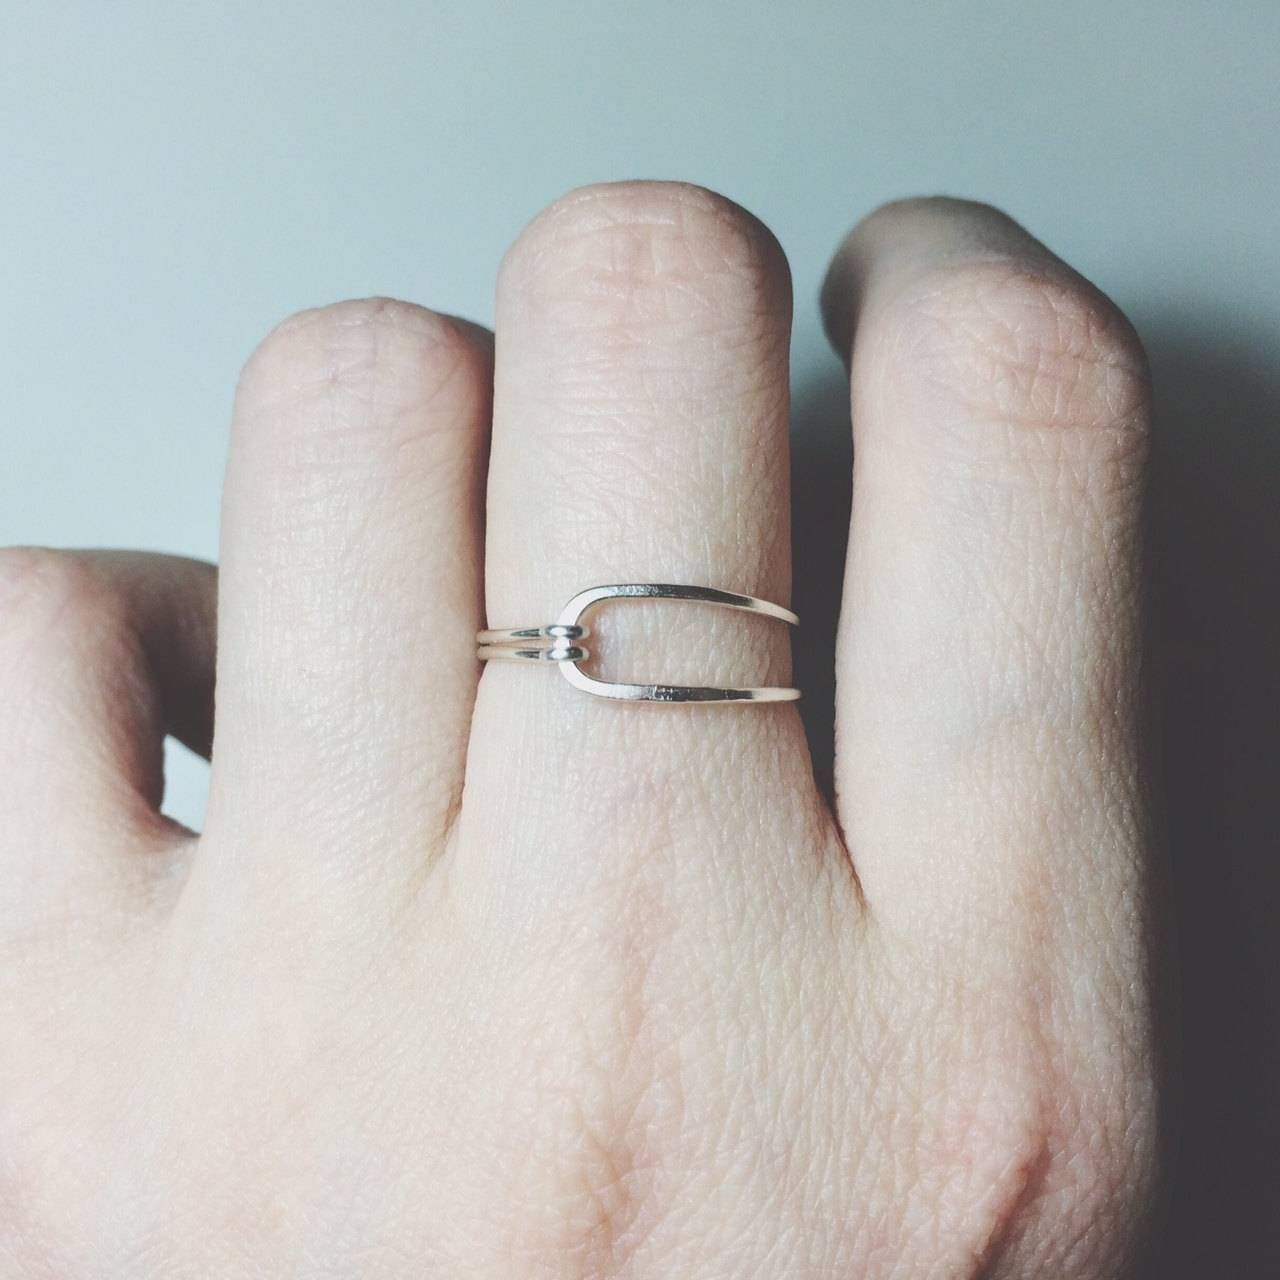 Tie The Knot Ring/knot Ring/minimalist/forget Me Not With Tie The Knot Engagement Rings (View 13 of 15)